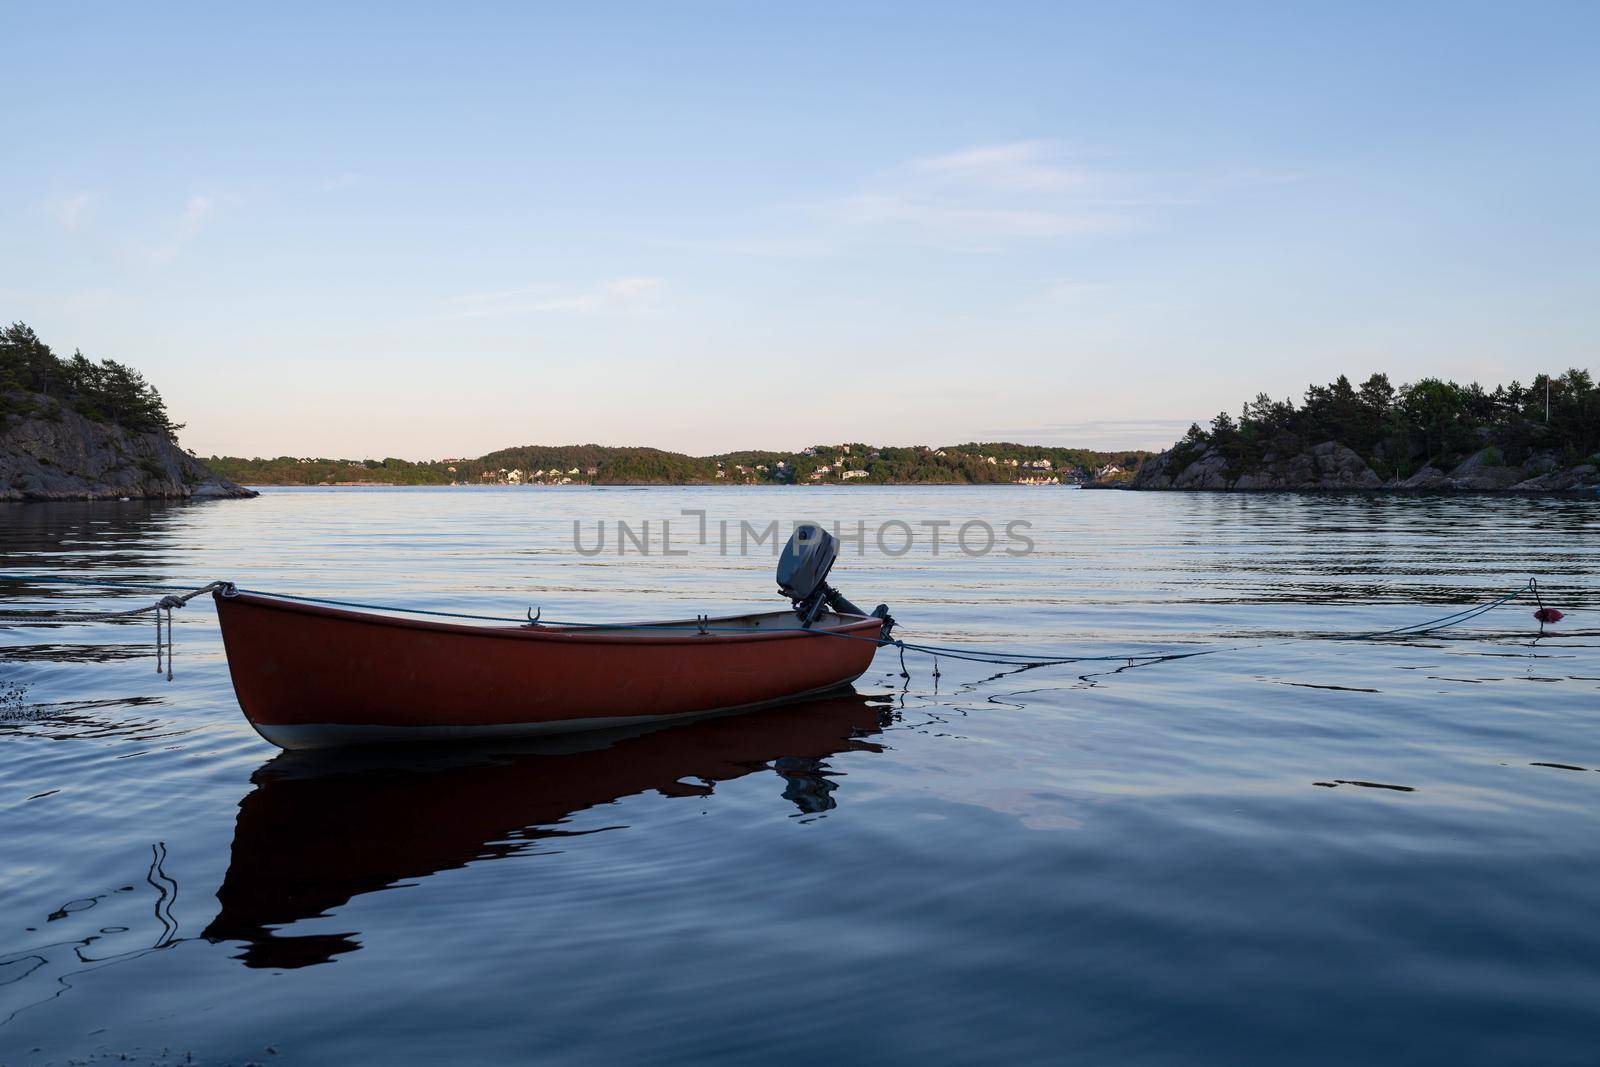 Small wooden boat in the middle of a lake, Lonely wooden boat in the water, isolated wooden boat, Top view of a white small wooden boat floating in the middle of a lake